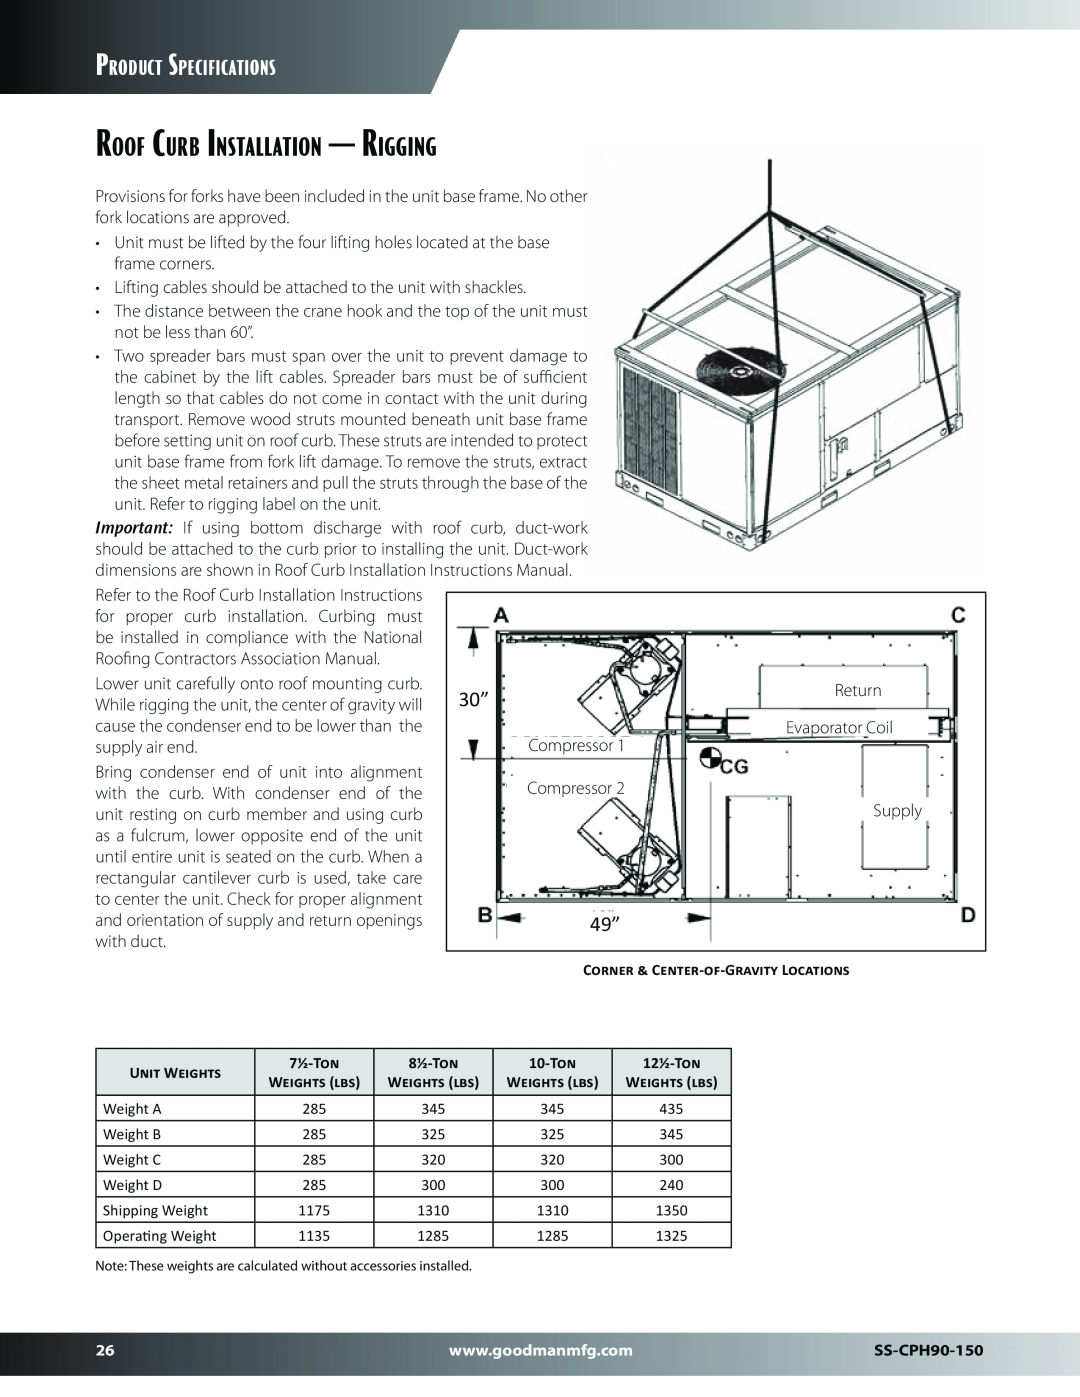 Goodman Mfg SS-CPH90-150 dimensions Roof Curb Installation - Rigging, Product Specifications 